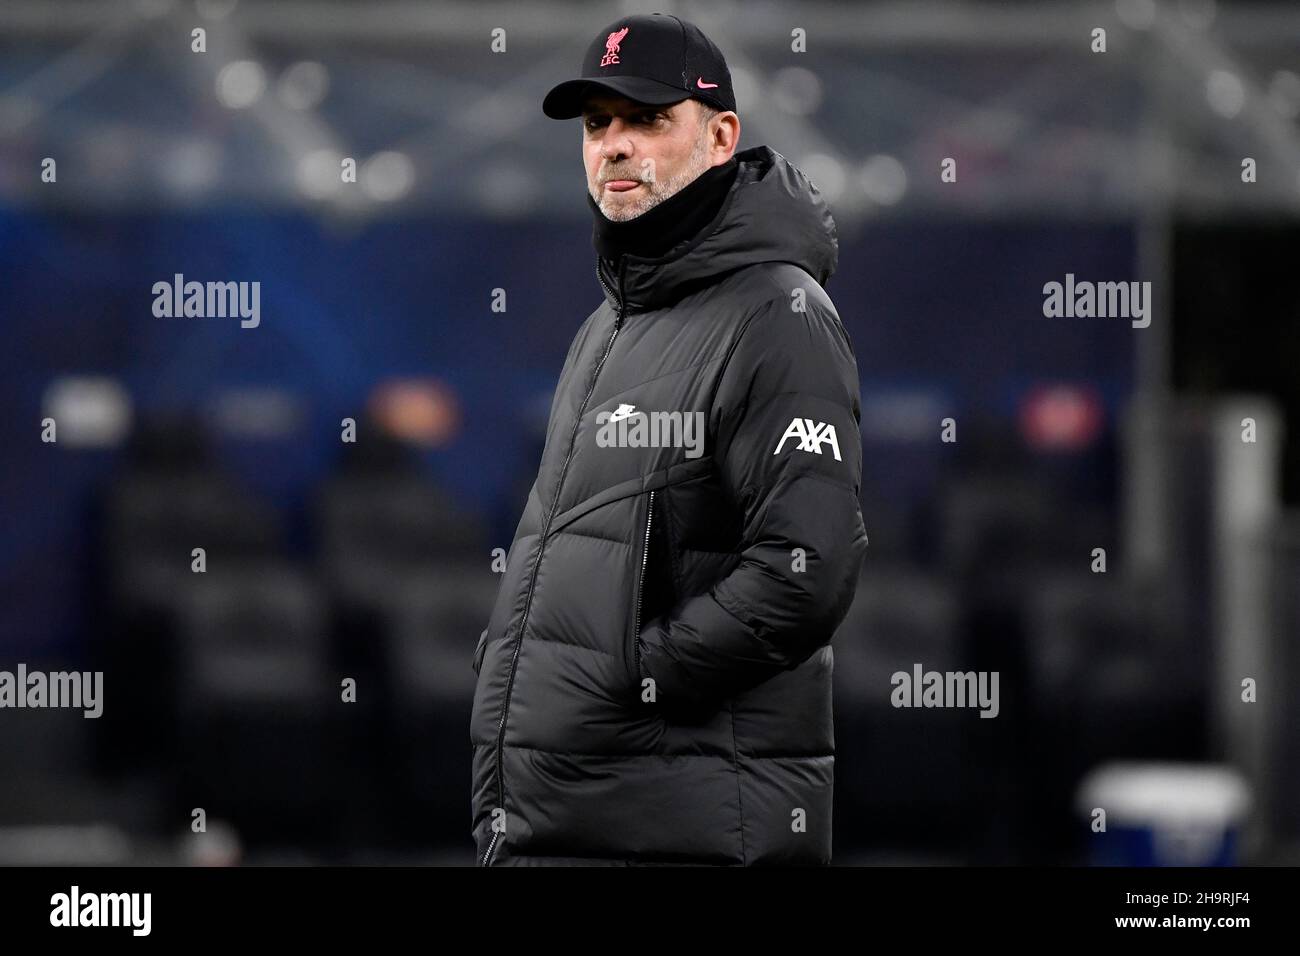 Jurgen Klopp High Resolution Stock Photography and Images - Alamy